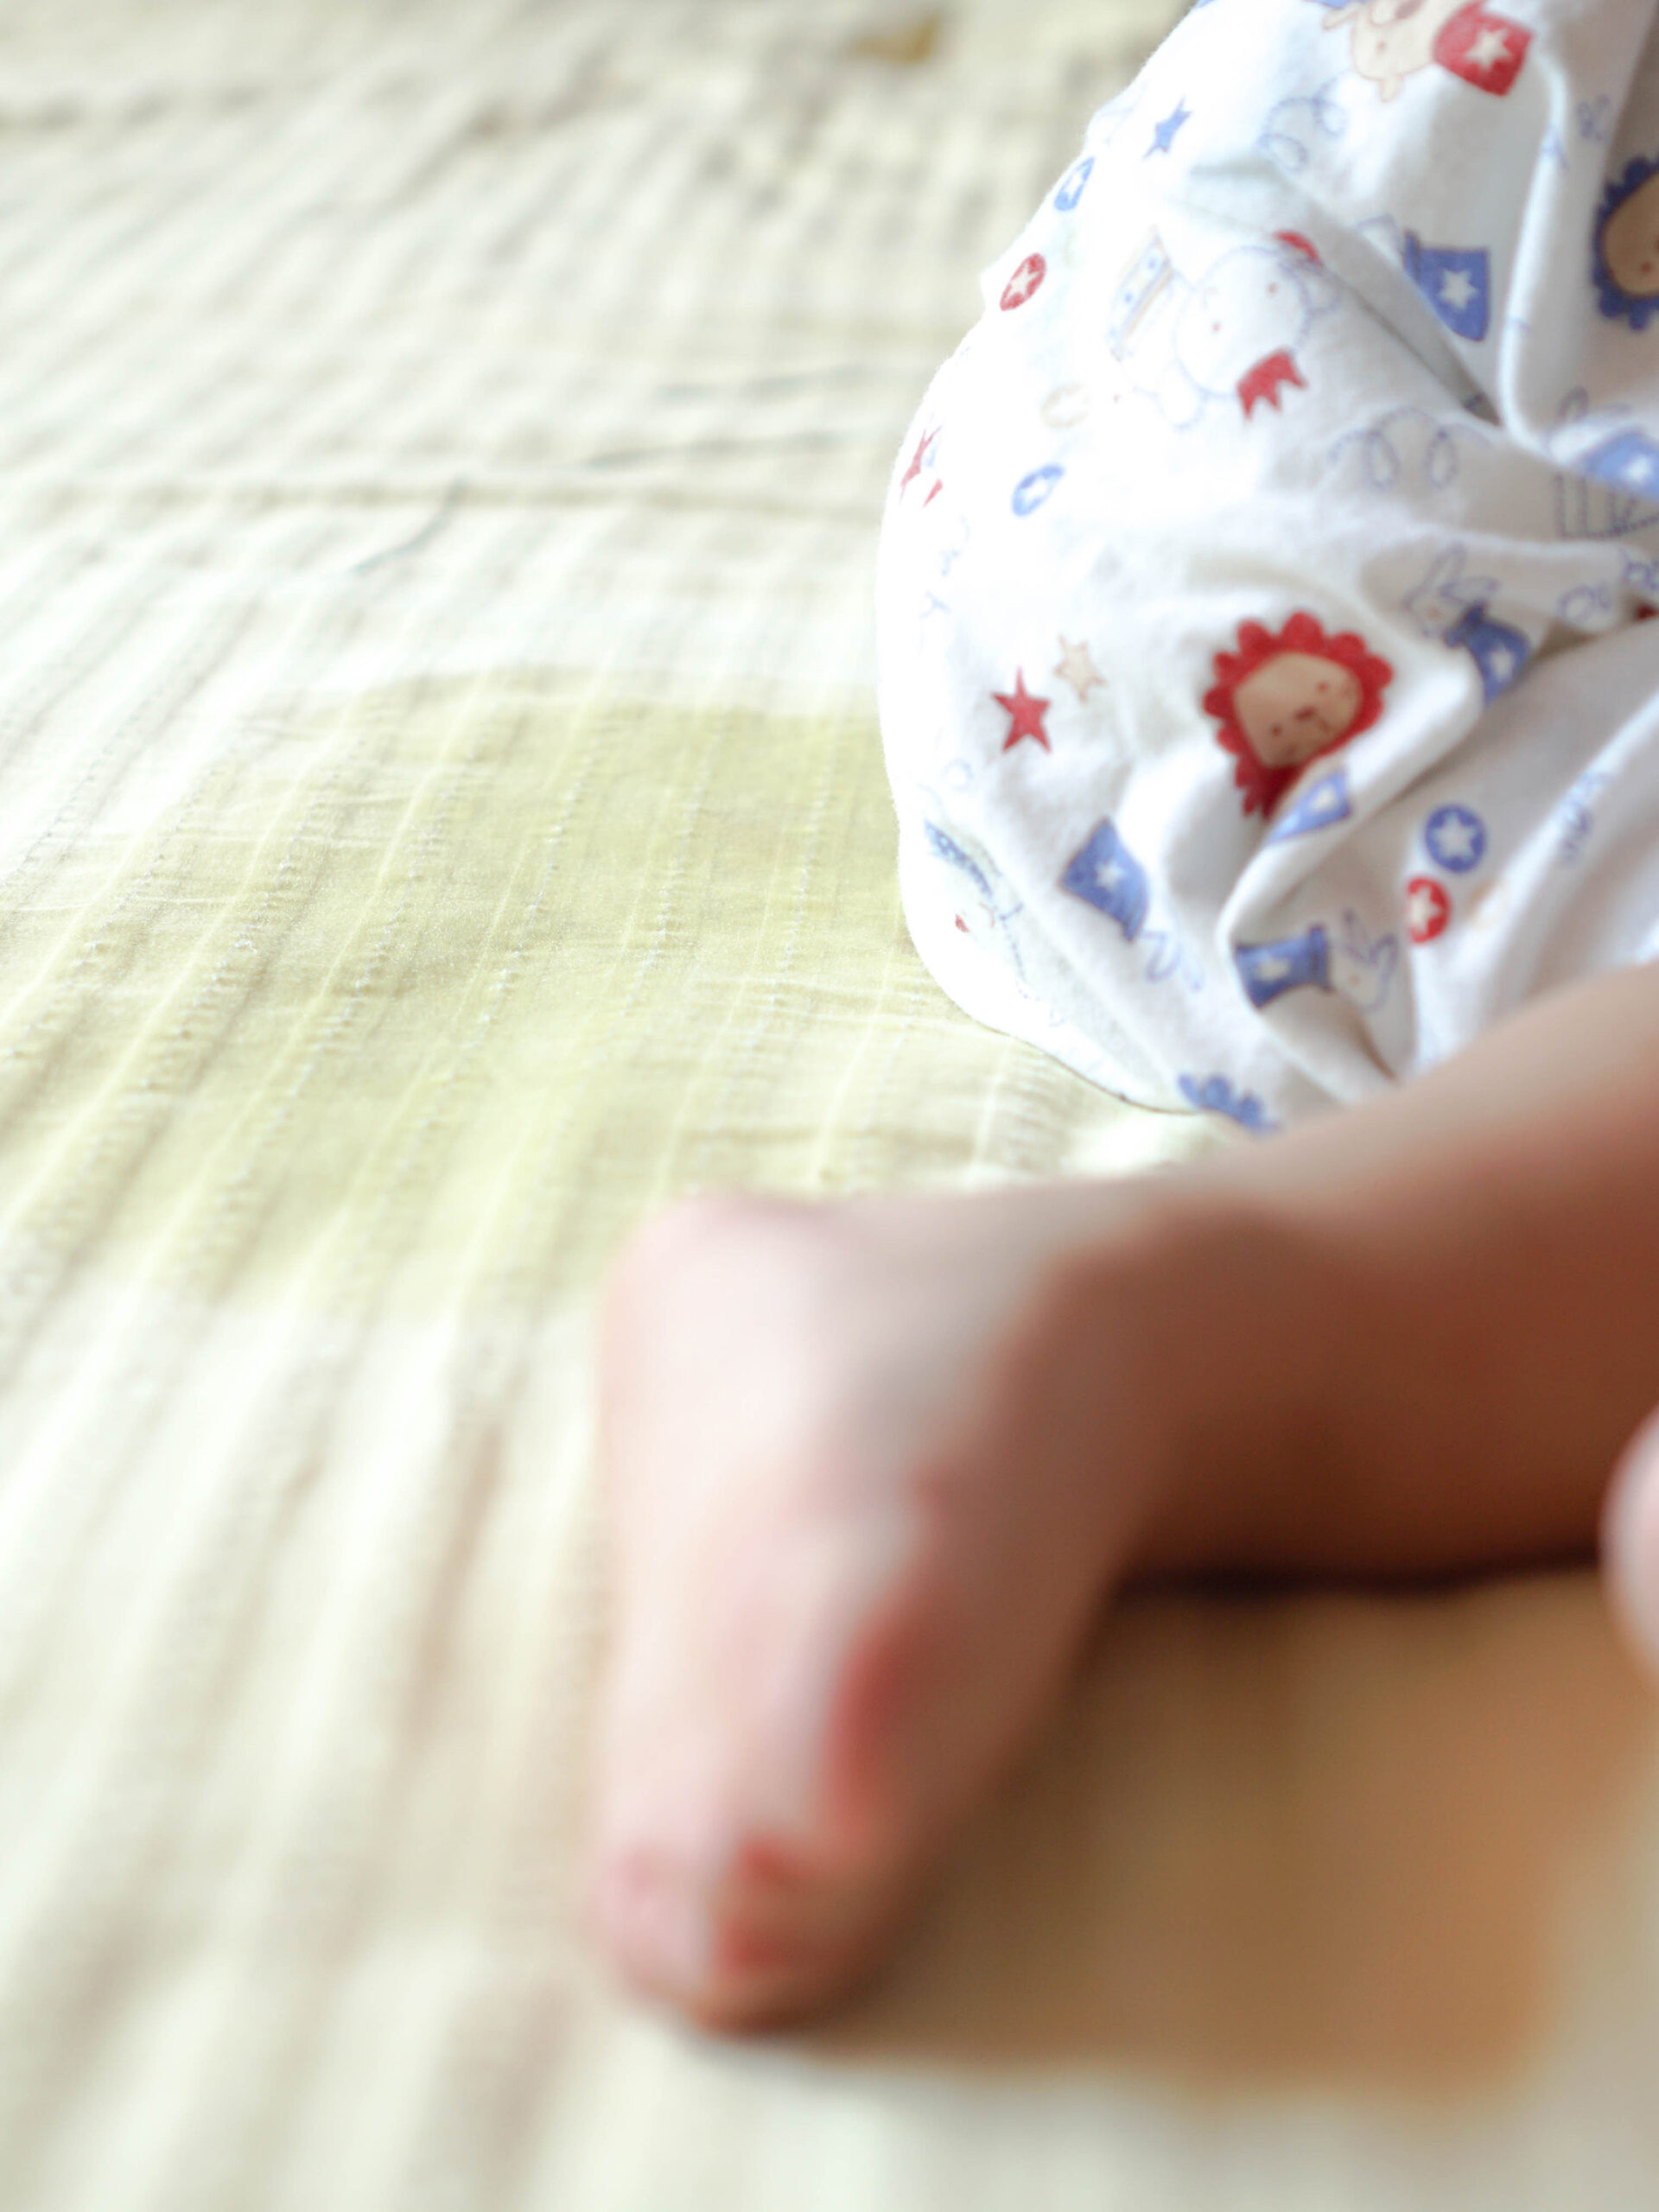 Child wets the bed - how parents can help prevent bedwetting in children